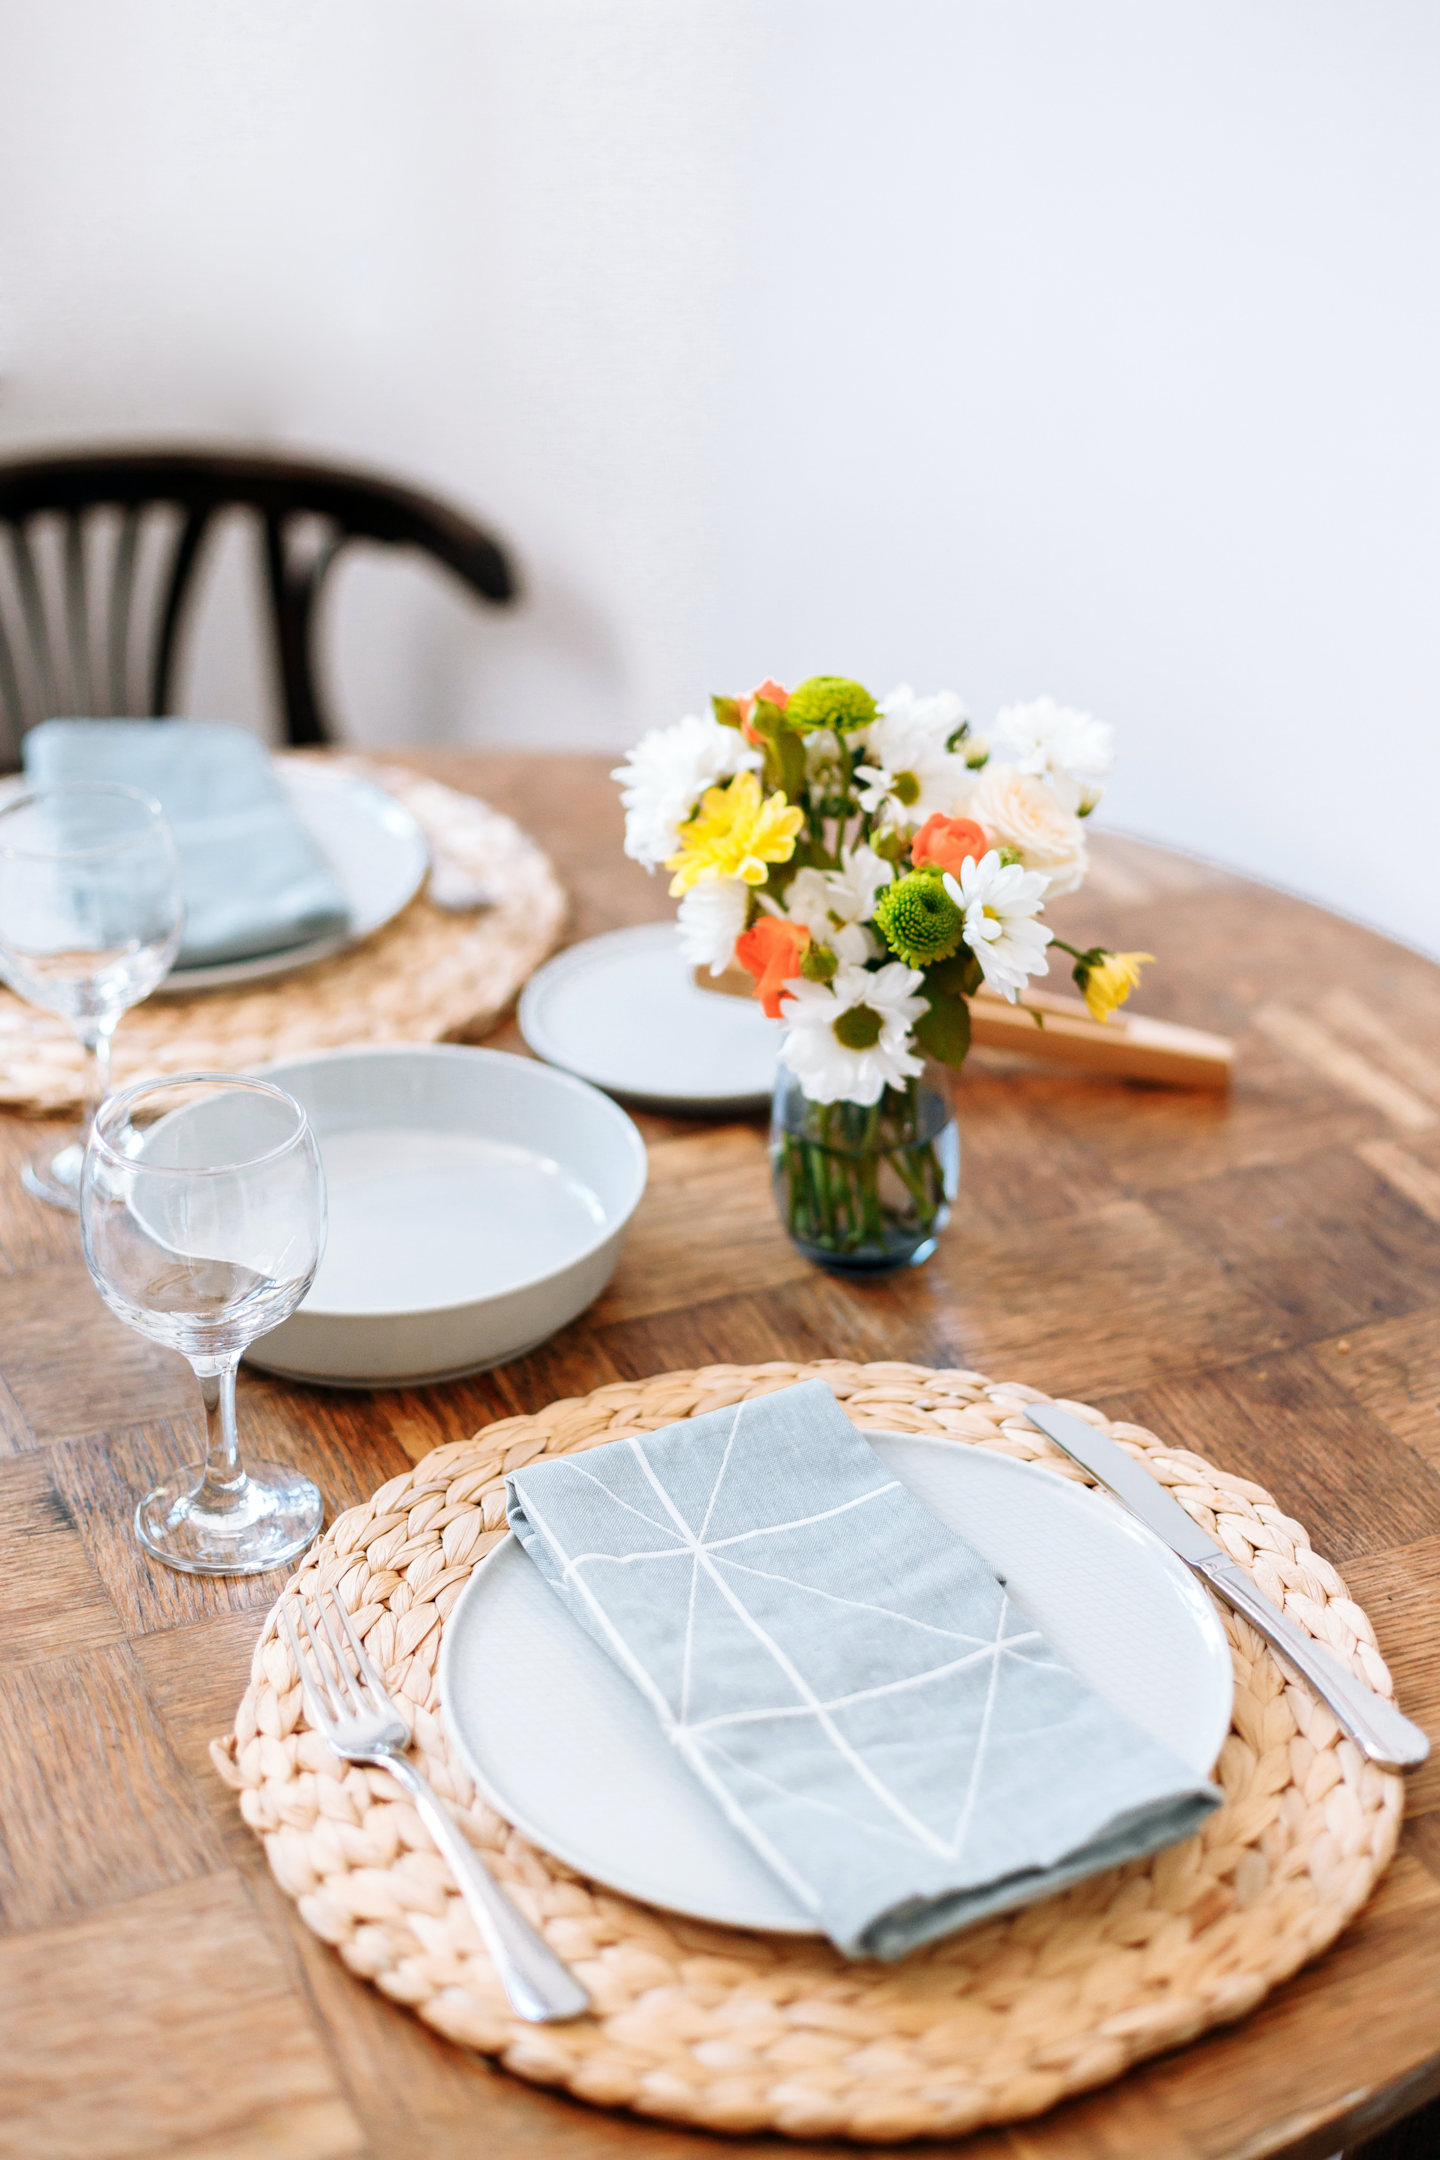 Image credit: https://www.pexels.com/photo/table-setting-for-two-in-the-dining-table-5053436/